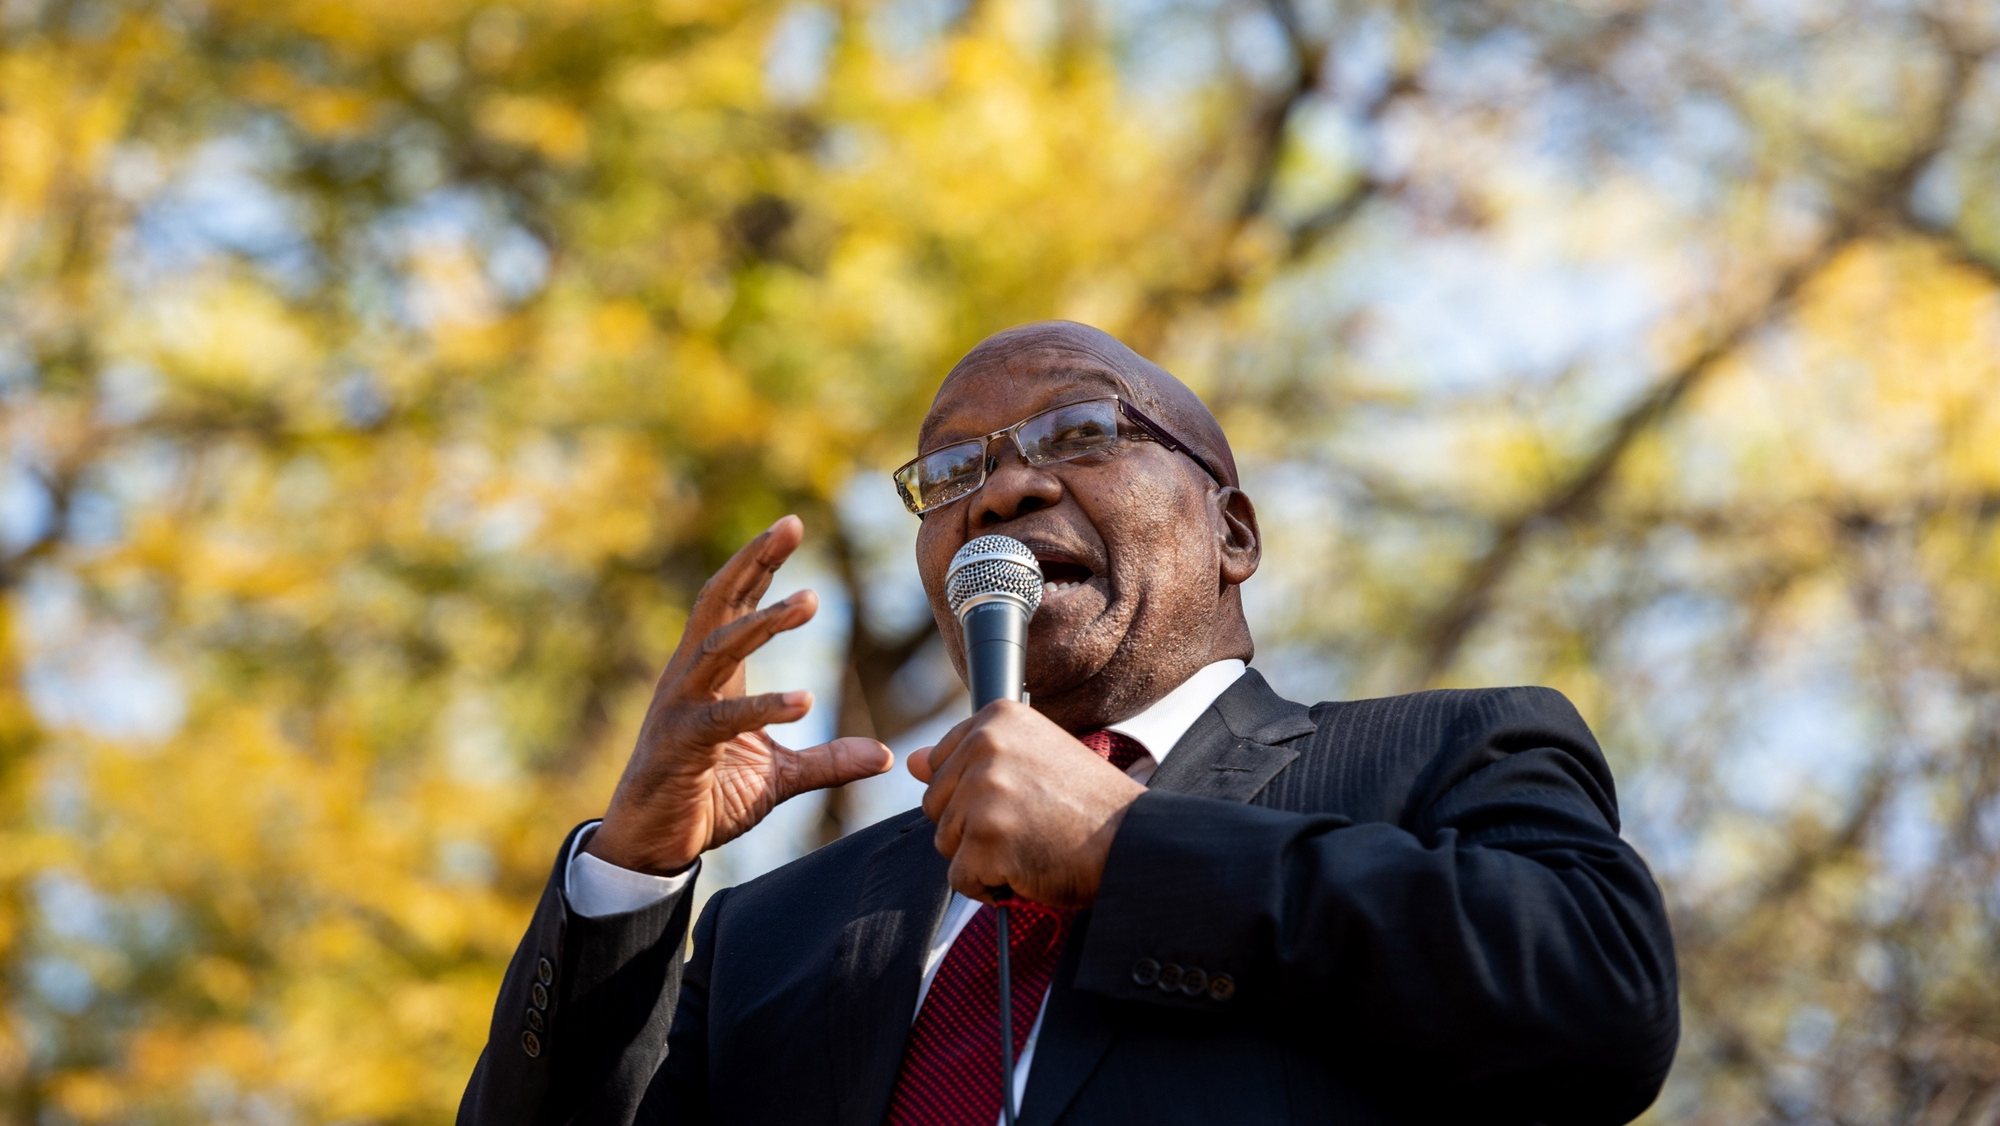 epa09399840 (FILE) - Former South African President Jacob Zuma addresses his supporters after the end of the fourth day of his testimony during the Commission of Inquiry into State Capture in Johannesburg, South Africa, 19 July 2019 (reissued 06 August 2021). South Africa&#039;s Department of Correctional Services on 06 August 2021 confirmed that former president Zuma moved from prison an outside hospital for routine medical observation. Zuma is serving a 15-month sentence for contempt of court.  EPA/YESHIEL PANCHIA